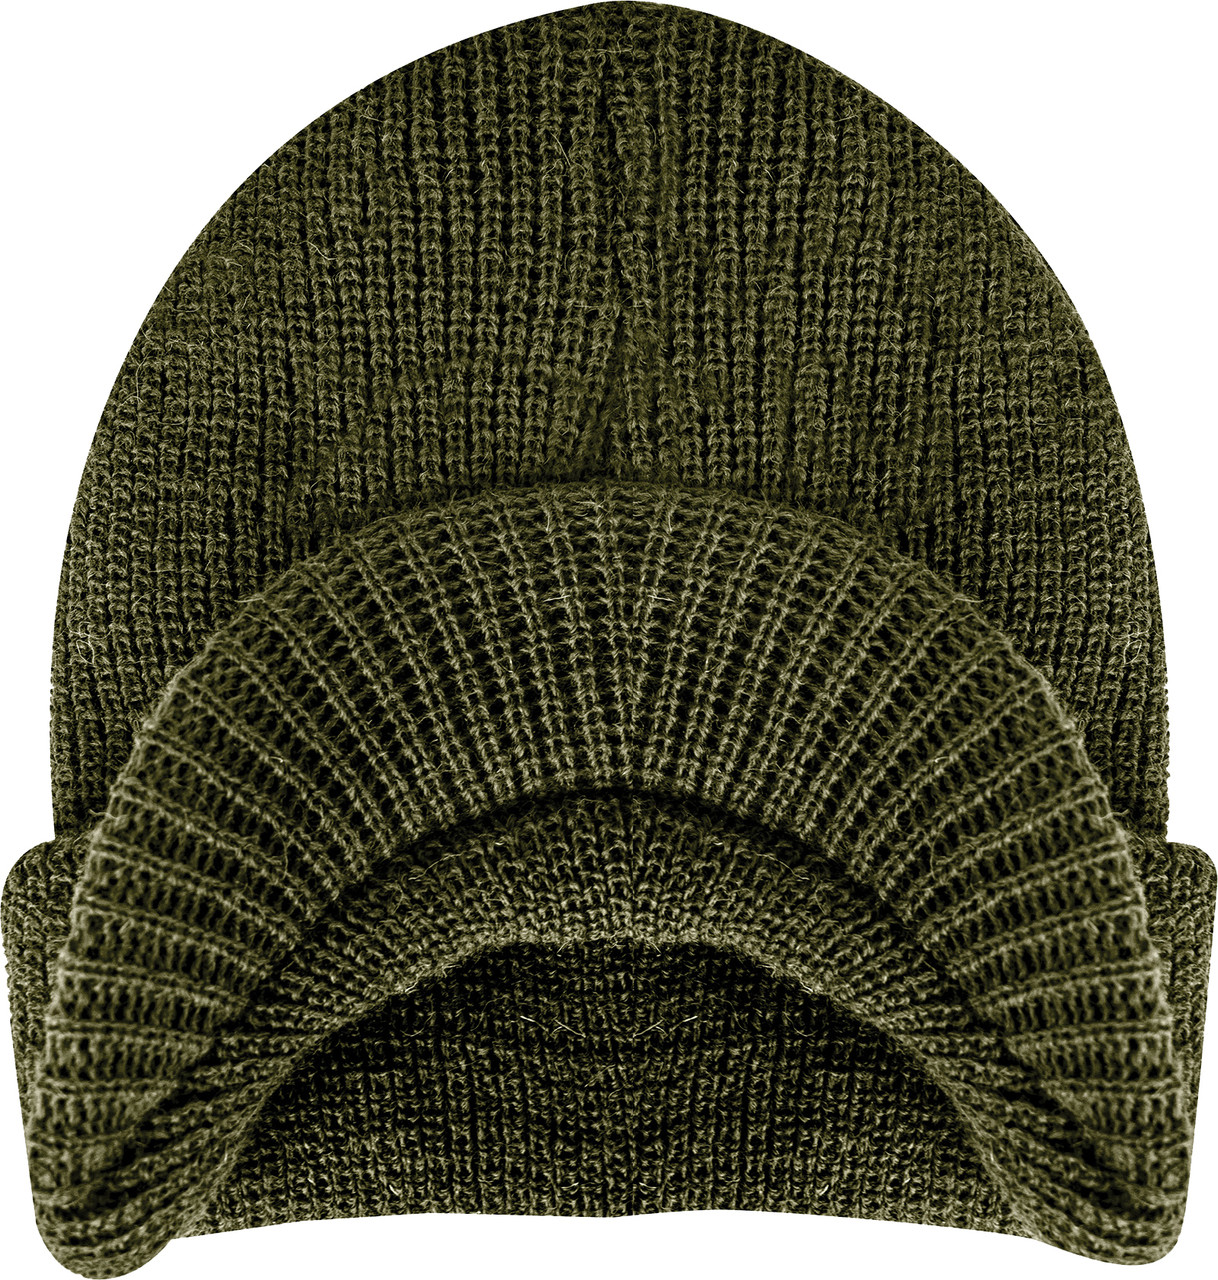 Wool Watch Cap with Brim Beanie Hat with Visor - Army Universe